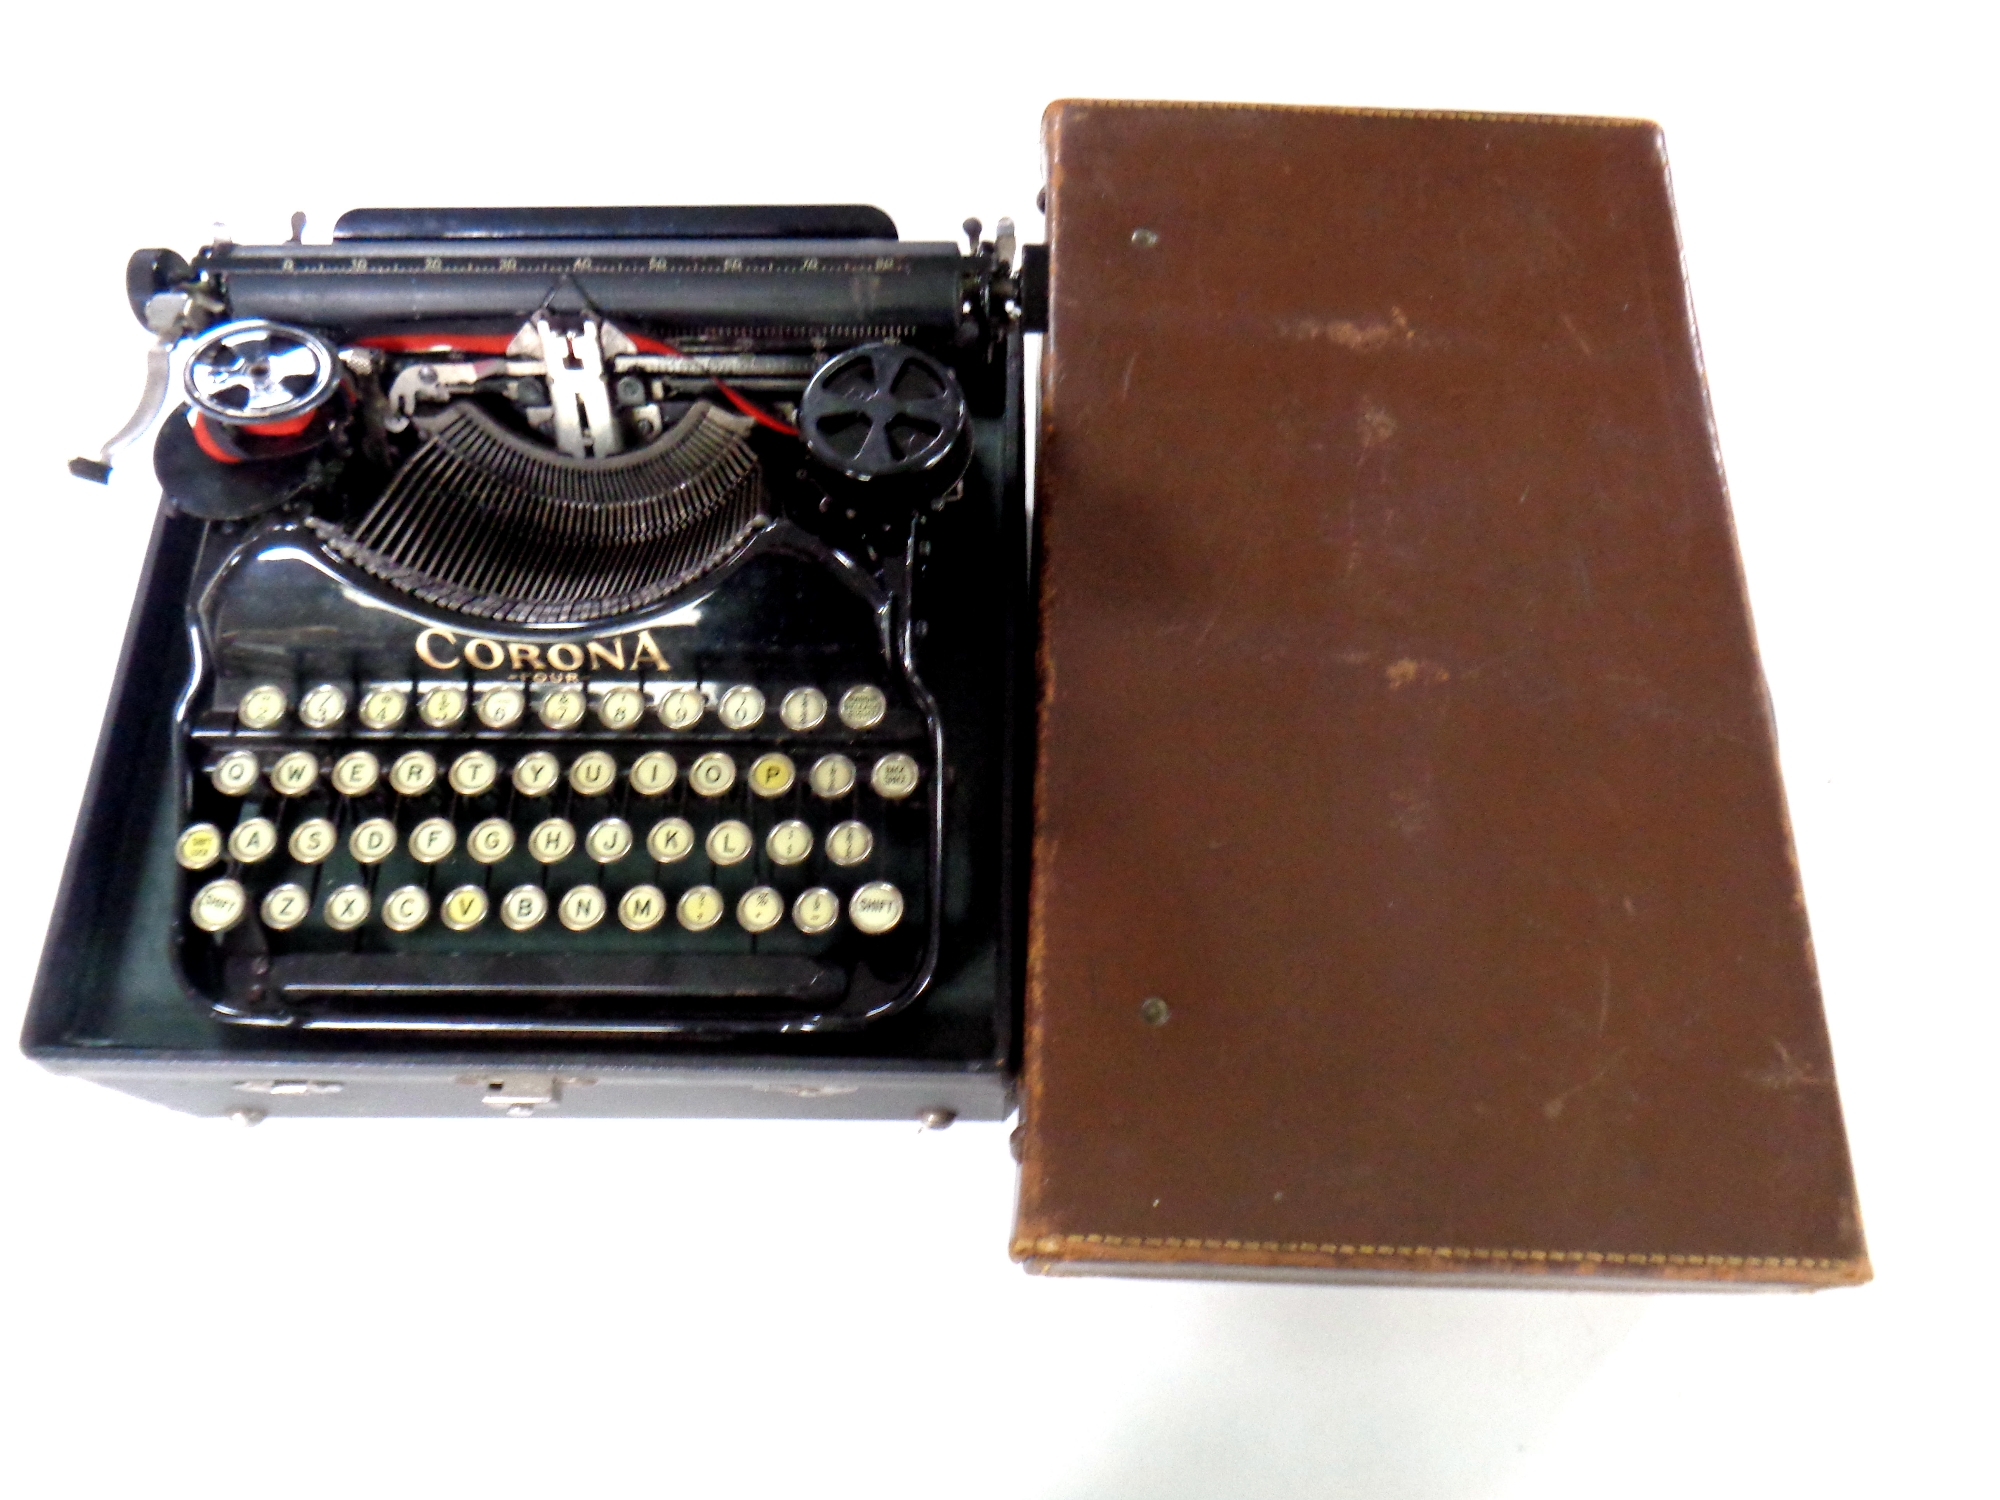 A cased vintage Corona typewriter together with a vintage leather luggage case